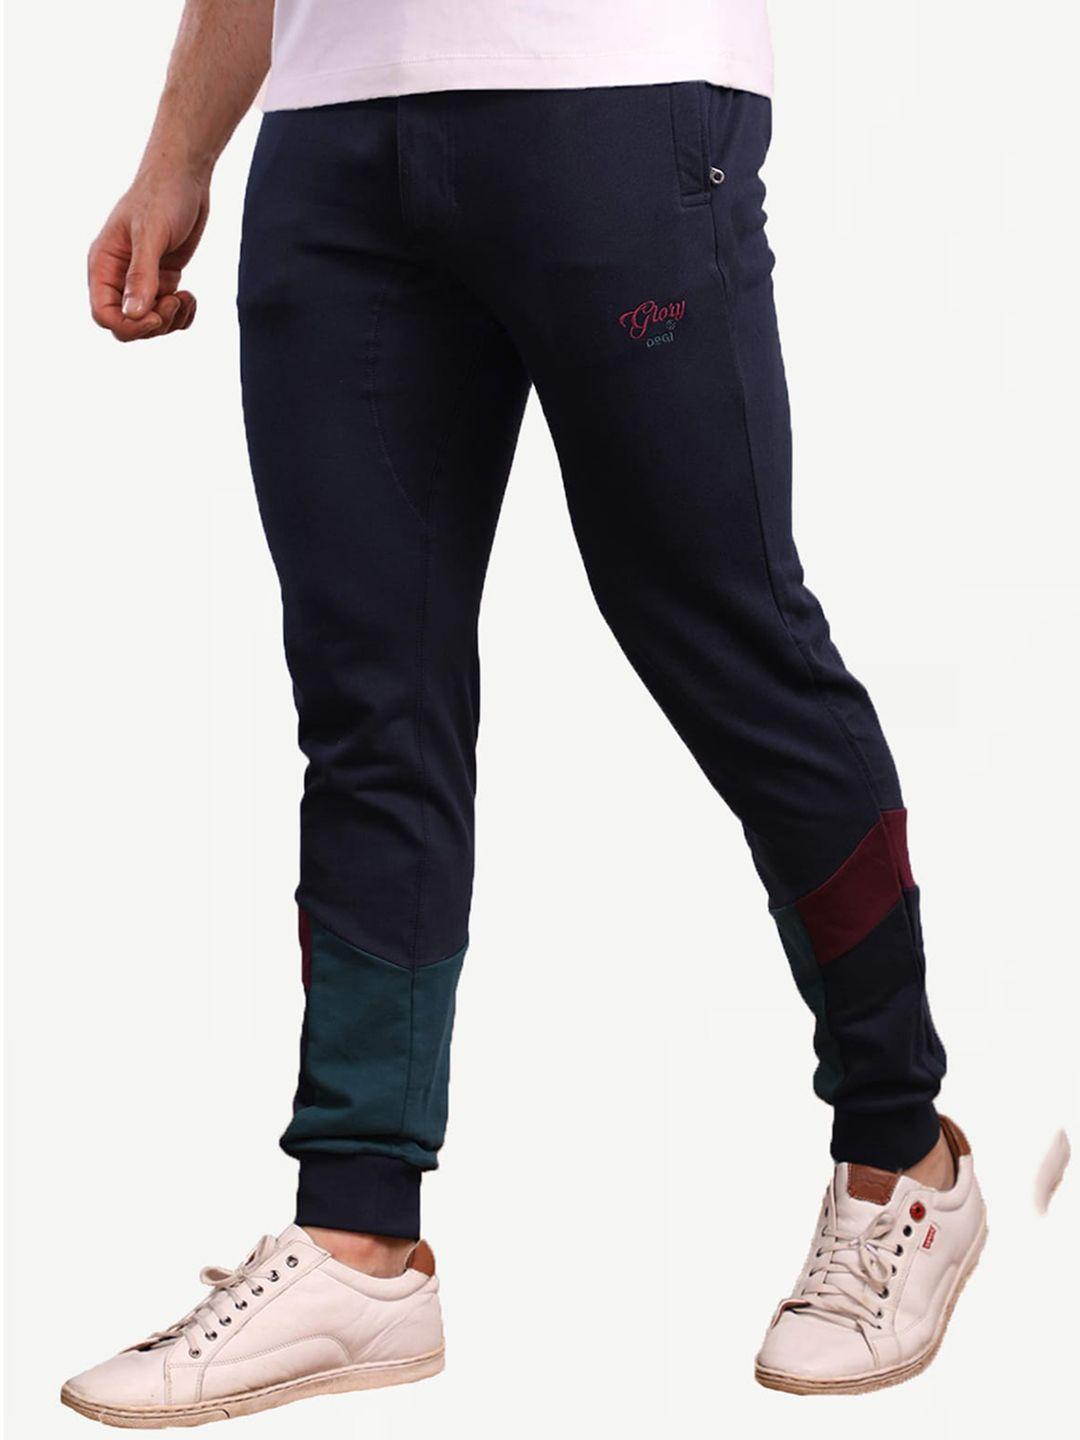 dream-of-glory-inc-men-navy-blue-solid-joggers